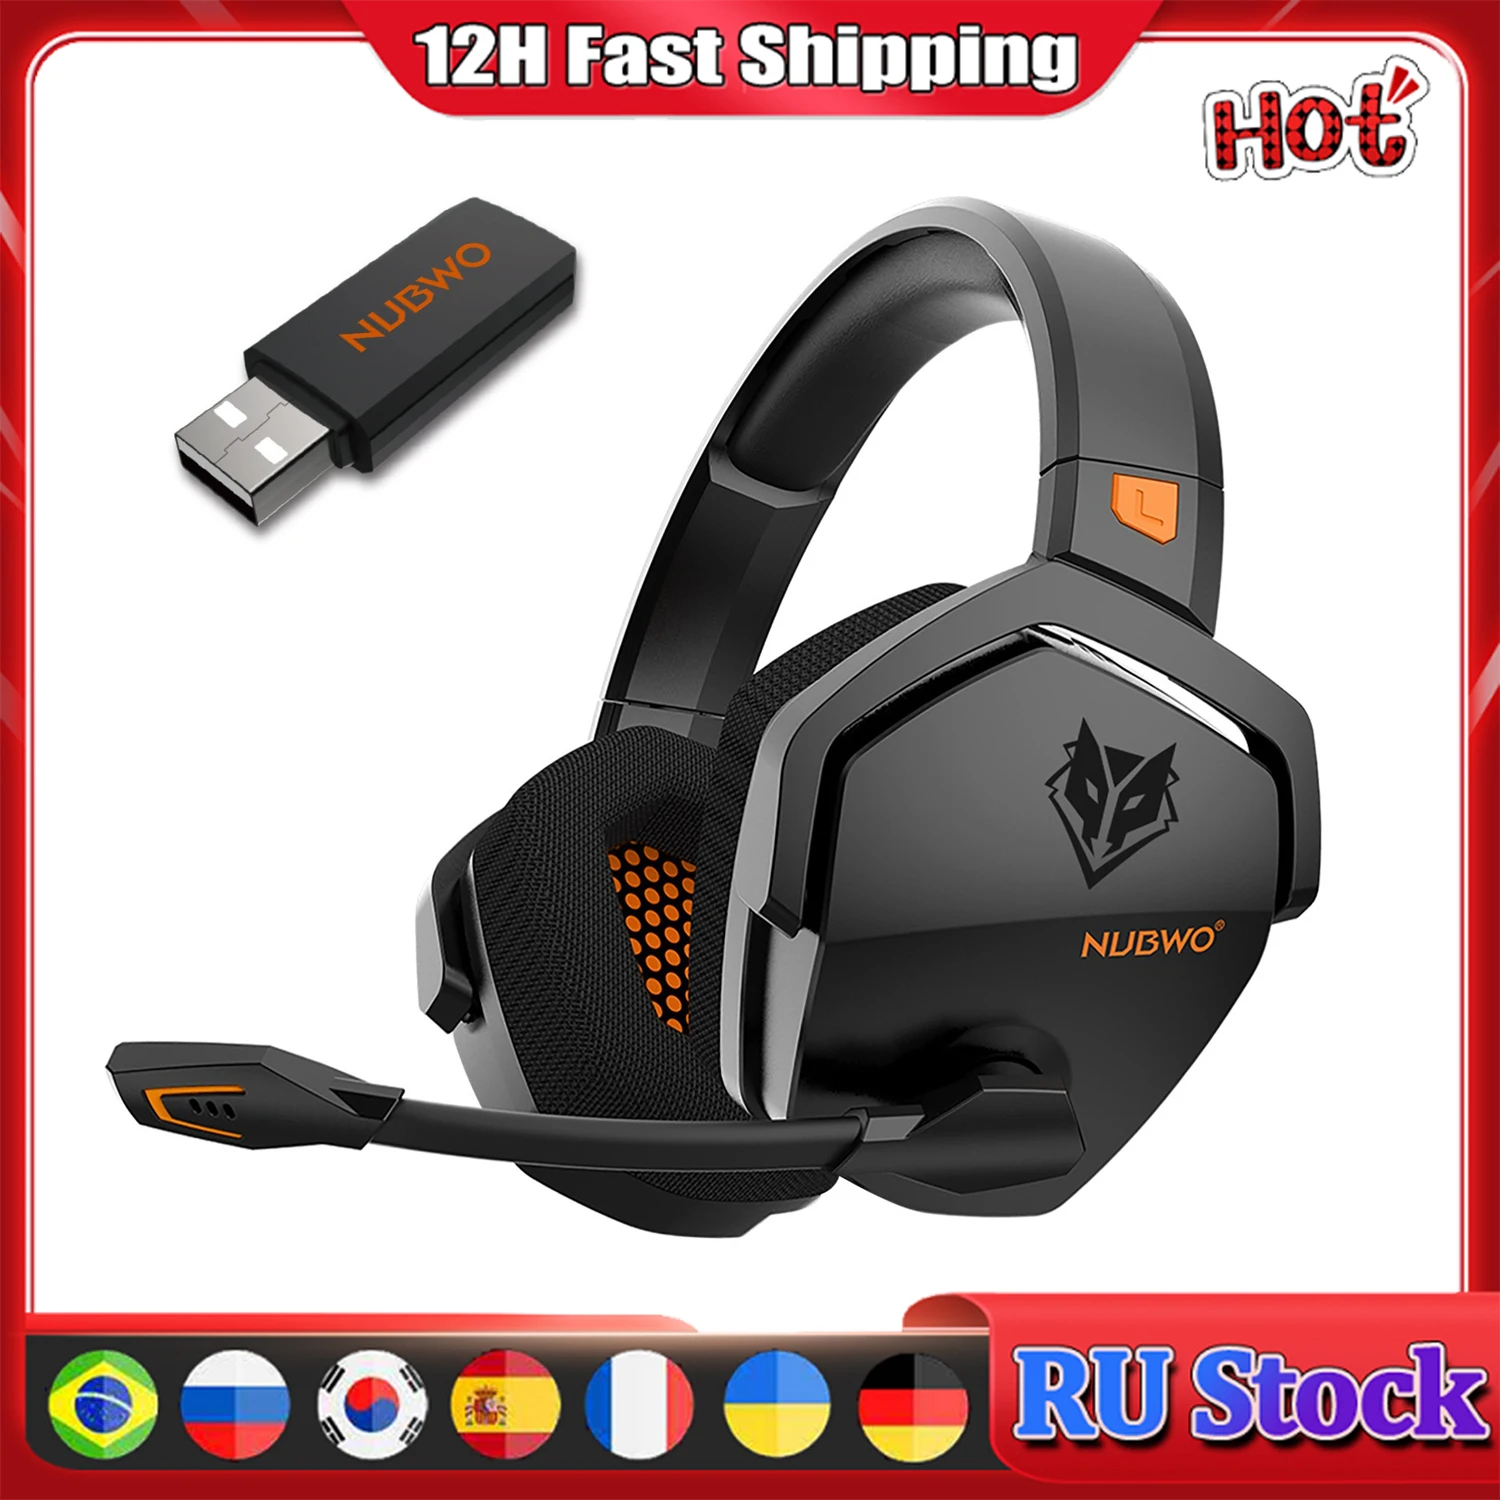 NUBWO G06 Wireless Gaming Headset for PS5 PS4 PC Laptop Over Ear Headphones with Mic 2.4G BT Wireless / Wired Headsets for Games